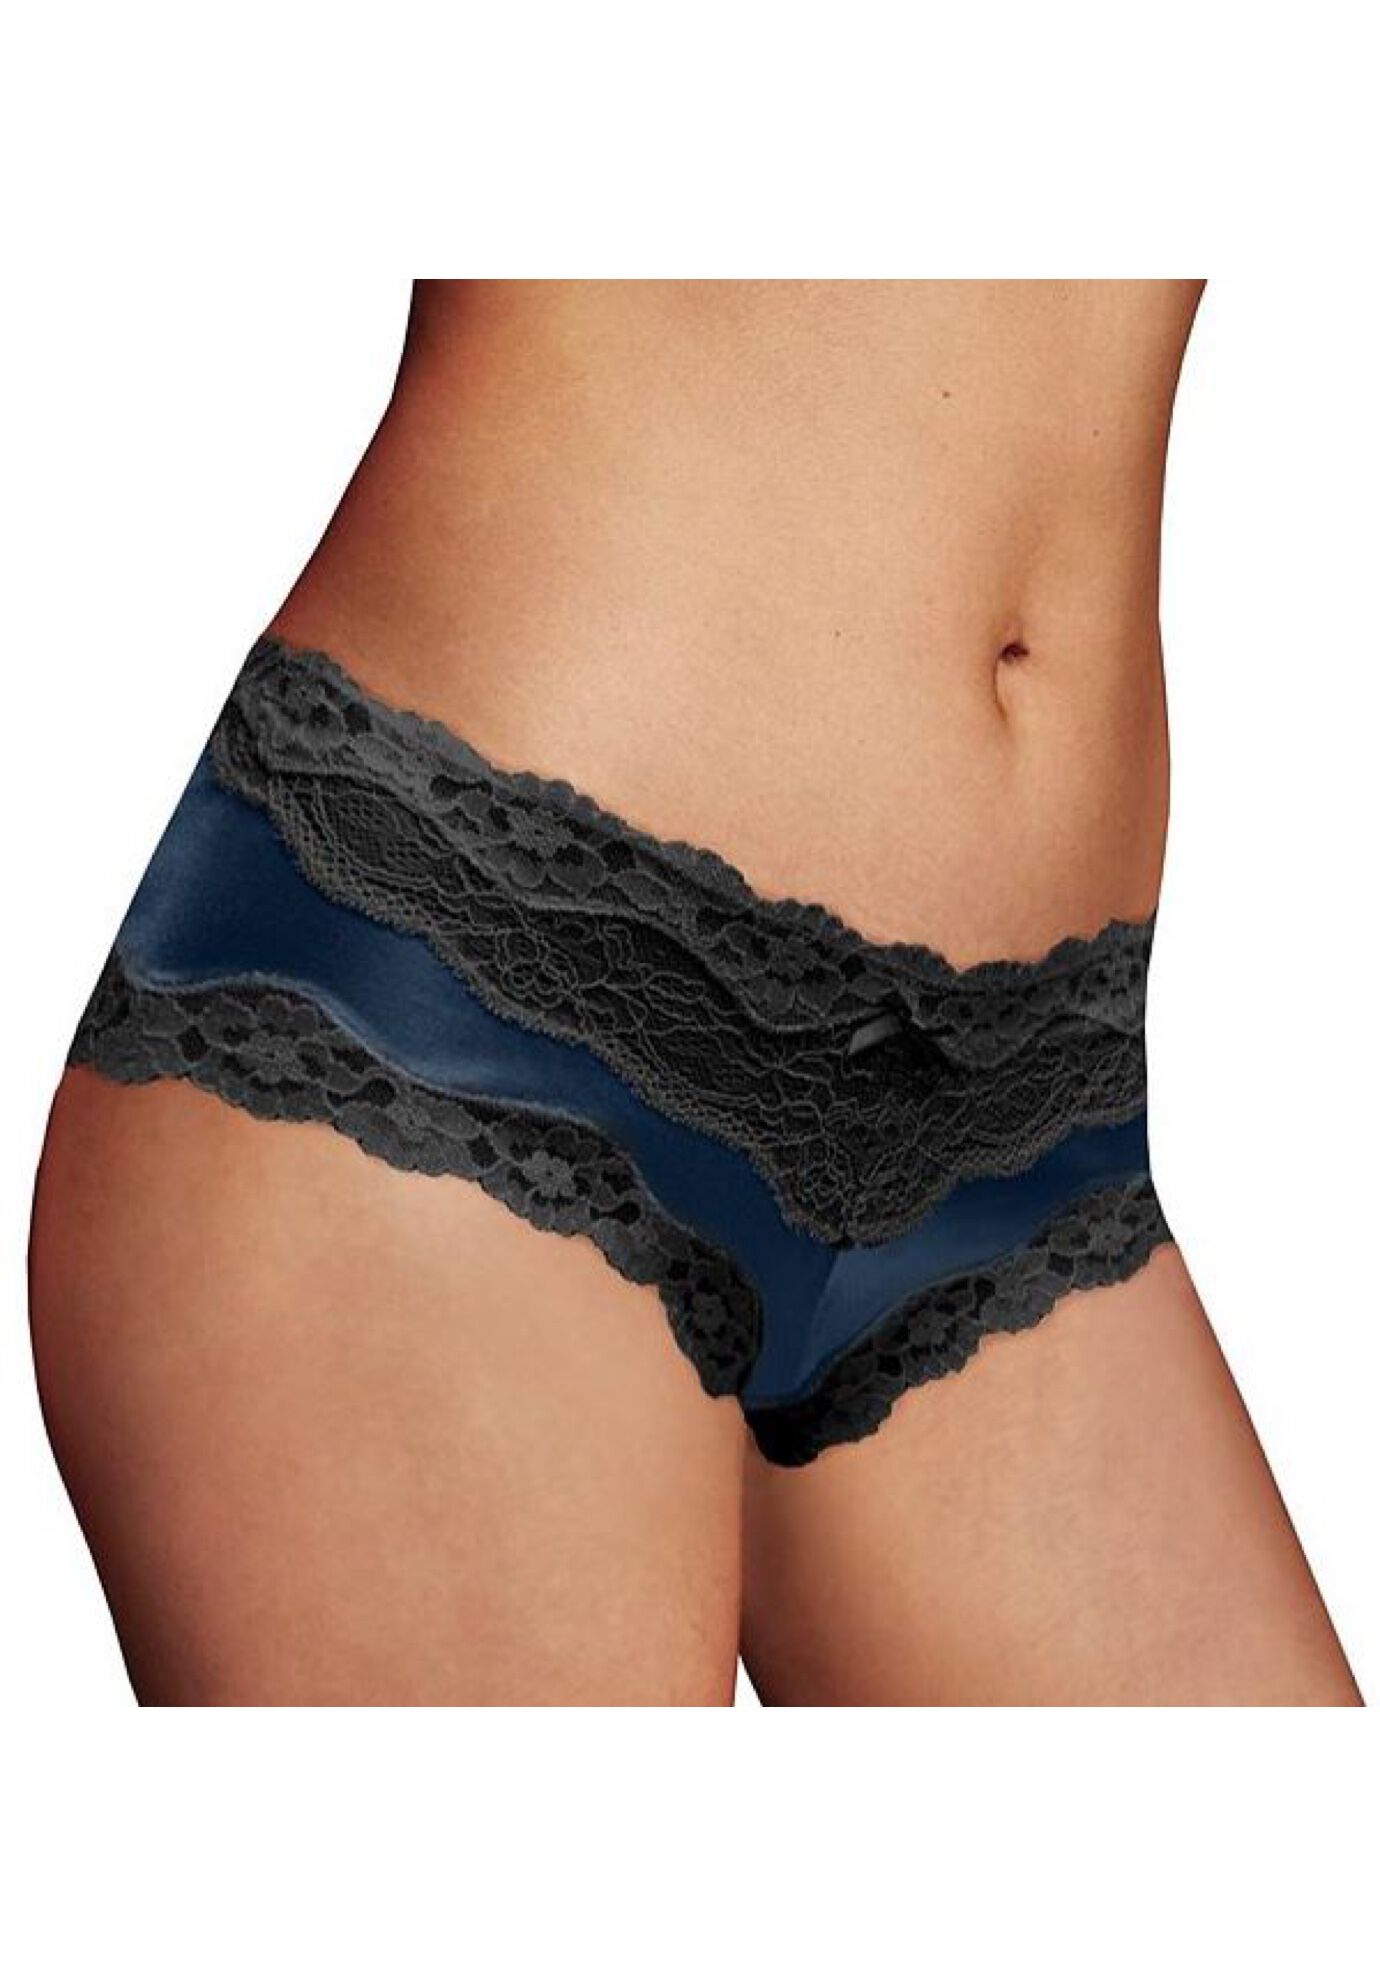 Plus Size Women's Cheeky Lace Hipster by Maidenform in Navy Black (Size 7)